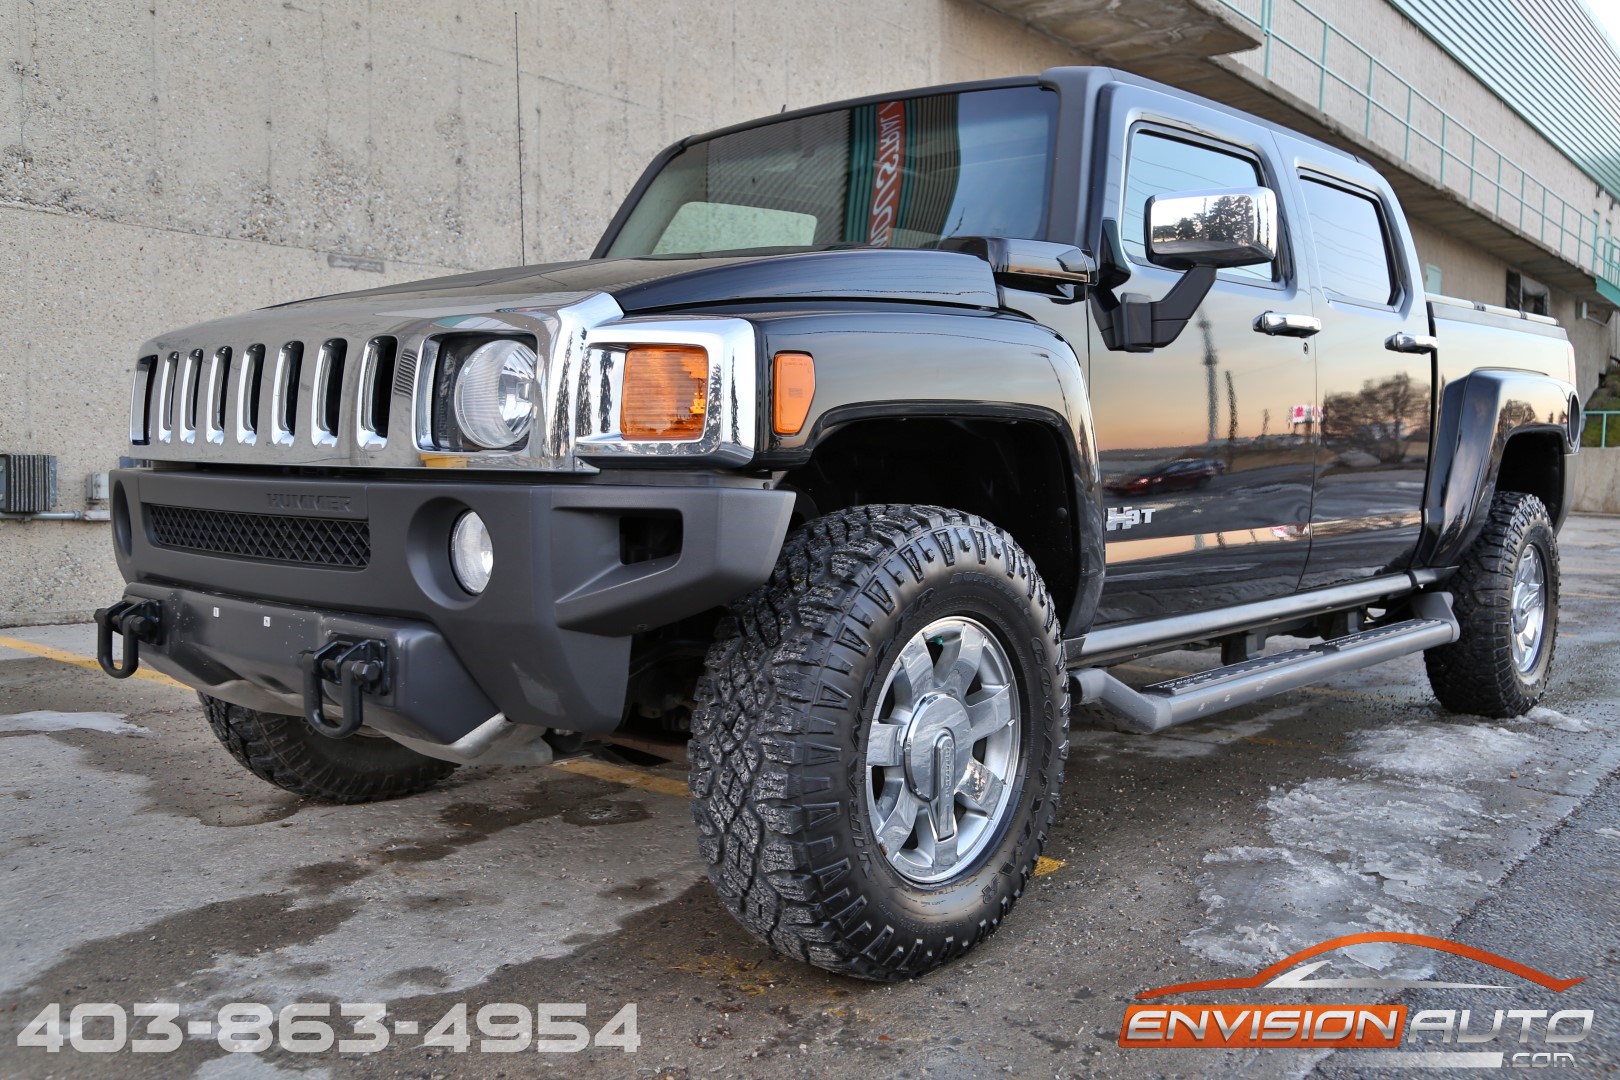 2010 H3T Hummer Truck Luxury Pkg 4×4 – Final Year Produced! - Envision Auto1620 x 1080